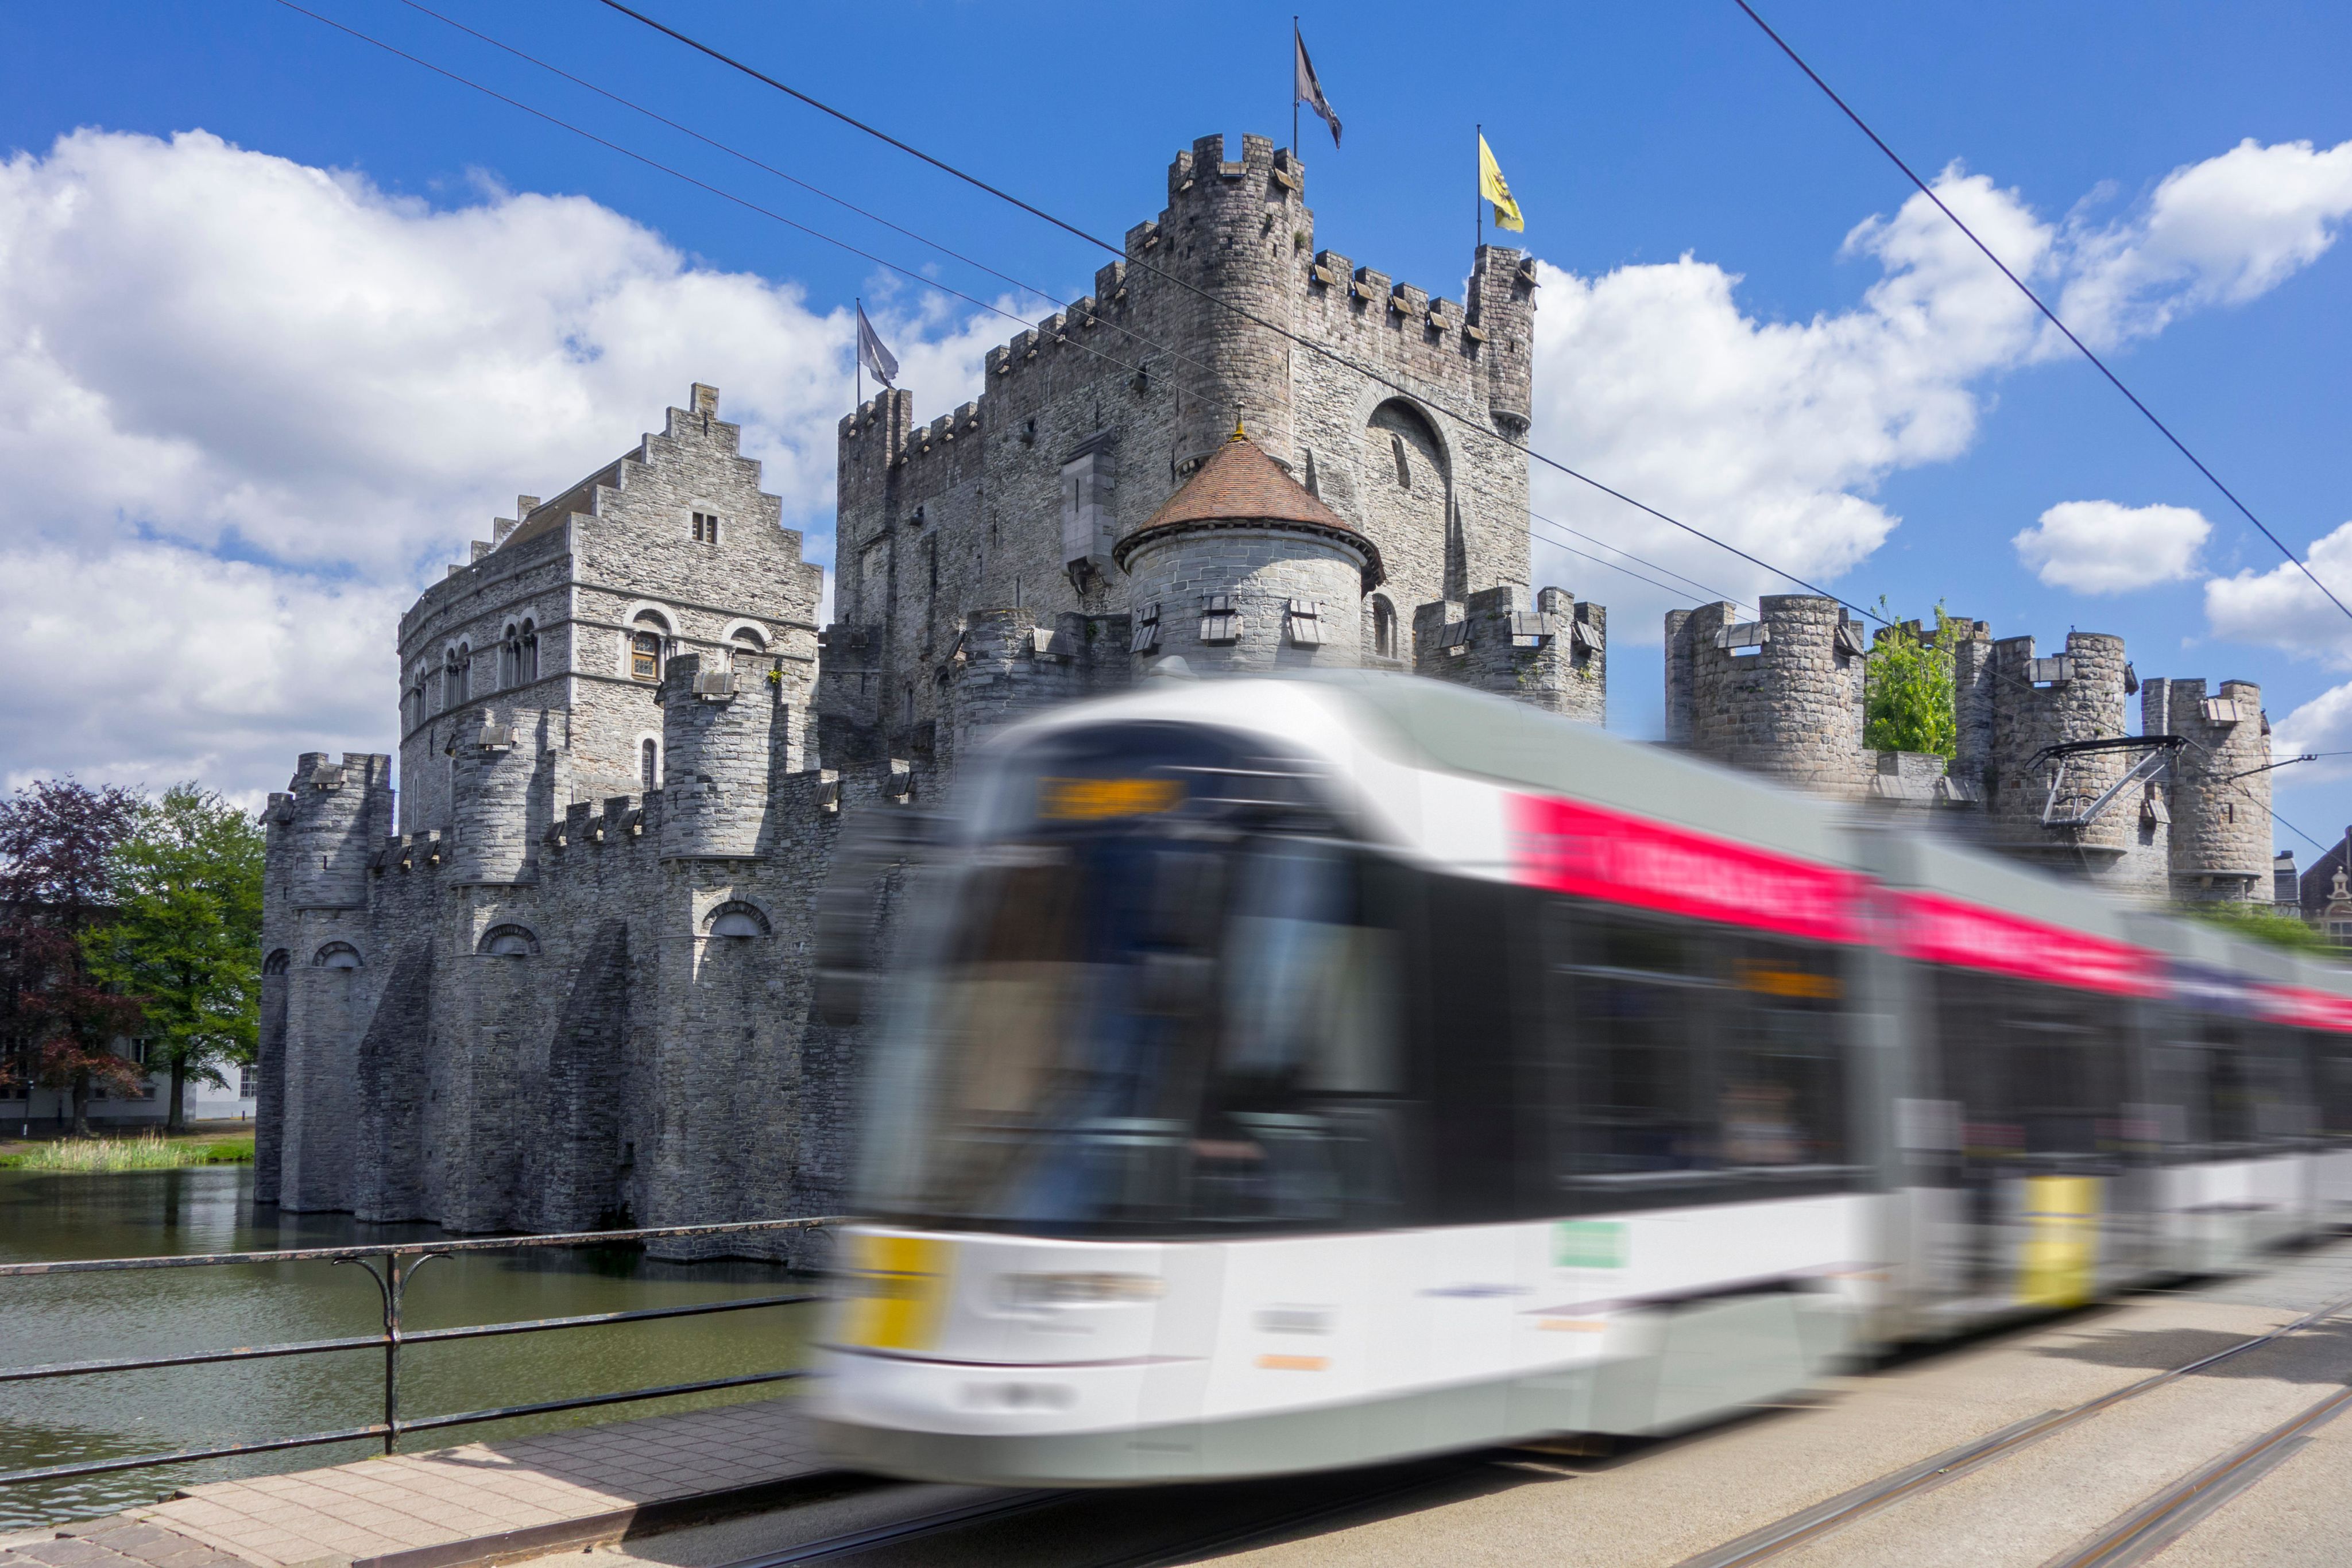 Blurred image of a tram in front of a castle in Ghent, Belgium